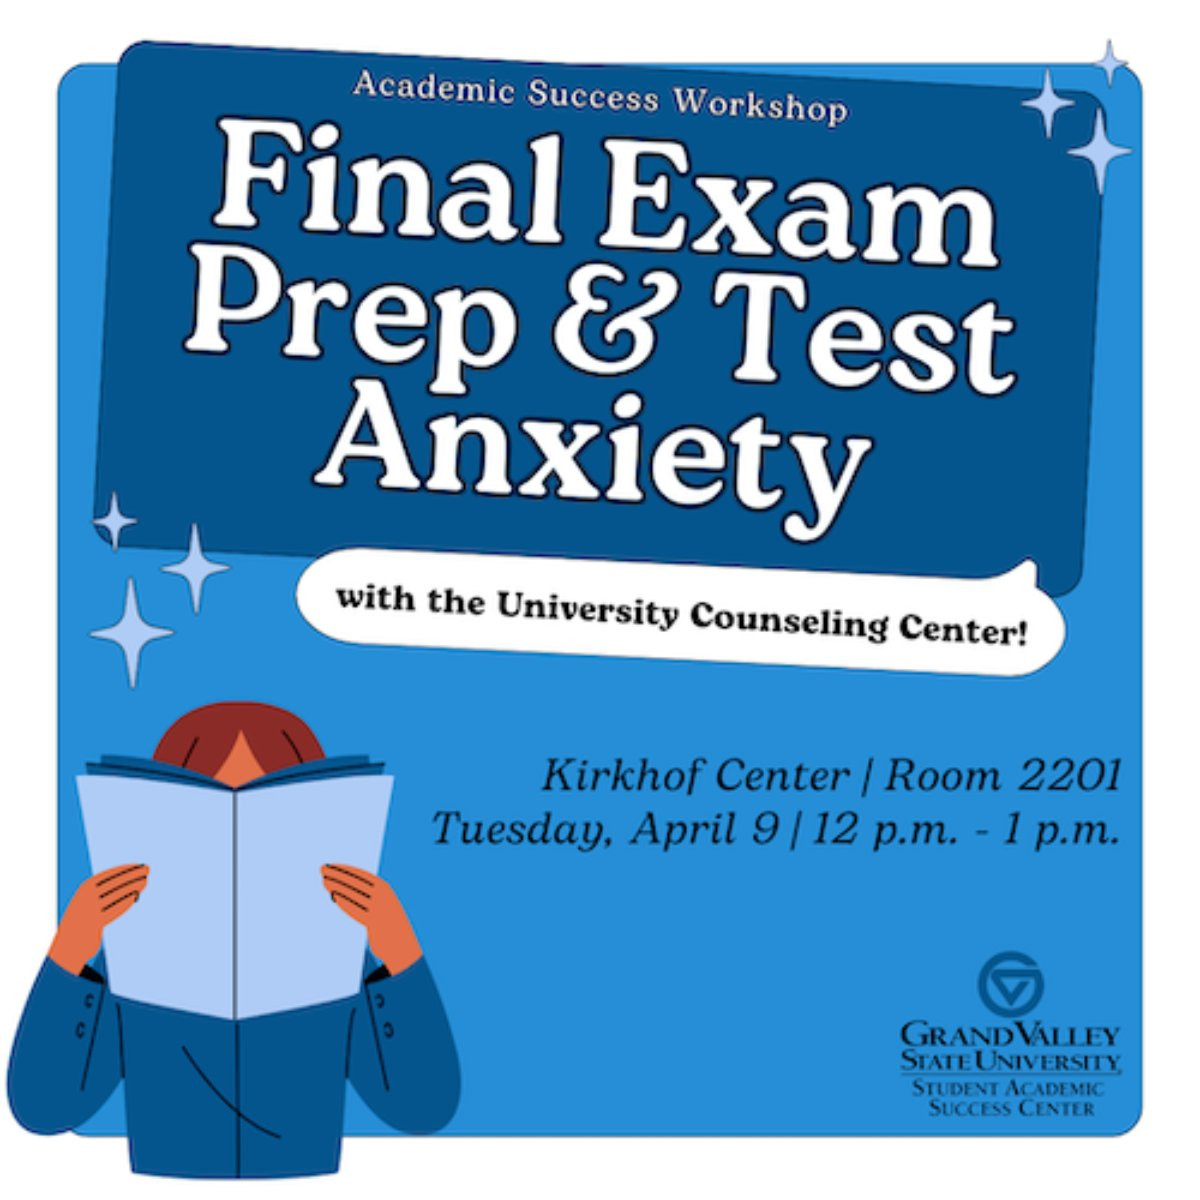 A student reading a book and a banner with text that reads Academic Success Workshop Final Exam Prep & Test Anxiety with the University Counseling Center taking place in Kirkhof Center Room 2201 on Tuesday, April 9 from 12 p.m. to 1 p.m. and the GVSU logo